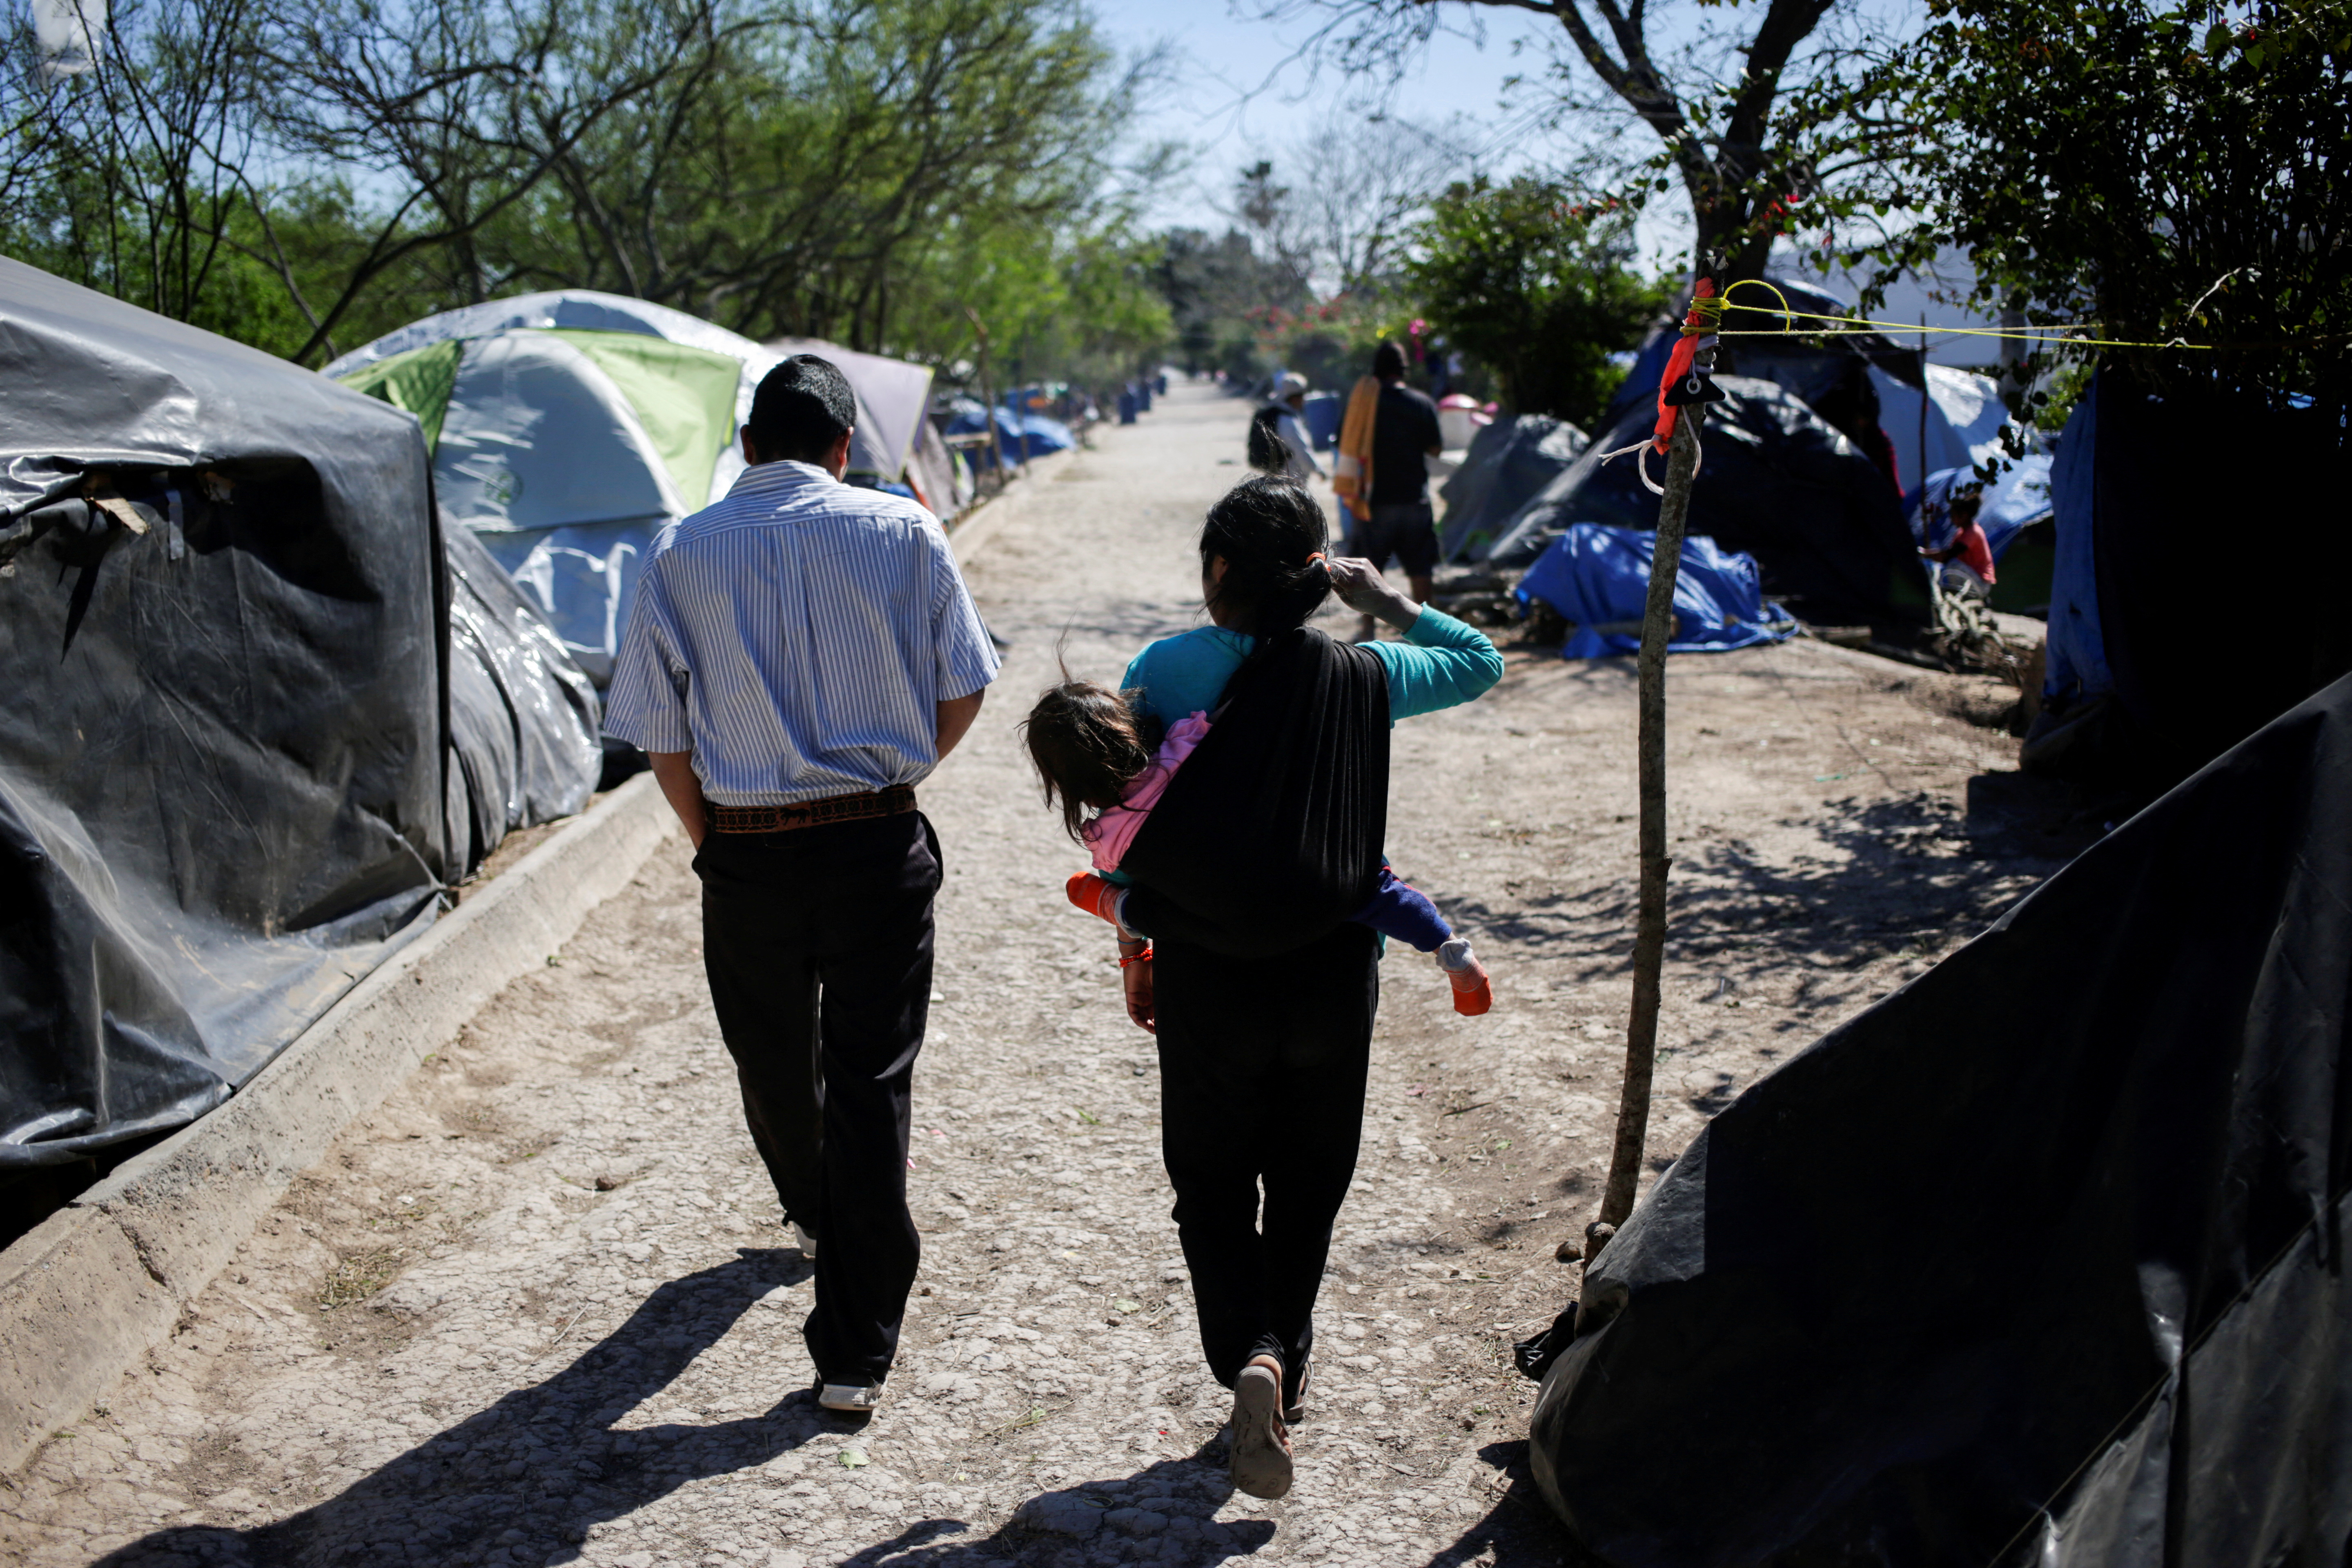 Migrants, asylum seekers sent back to Mexico from the U.S. under the Remain in Mexico program officially named Migrant Protection Protocols (MPP), are seen at provisional campsite near the Rio Bravo in Matamoros